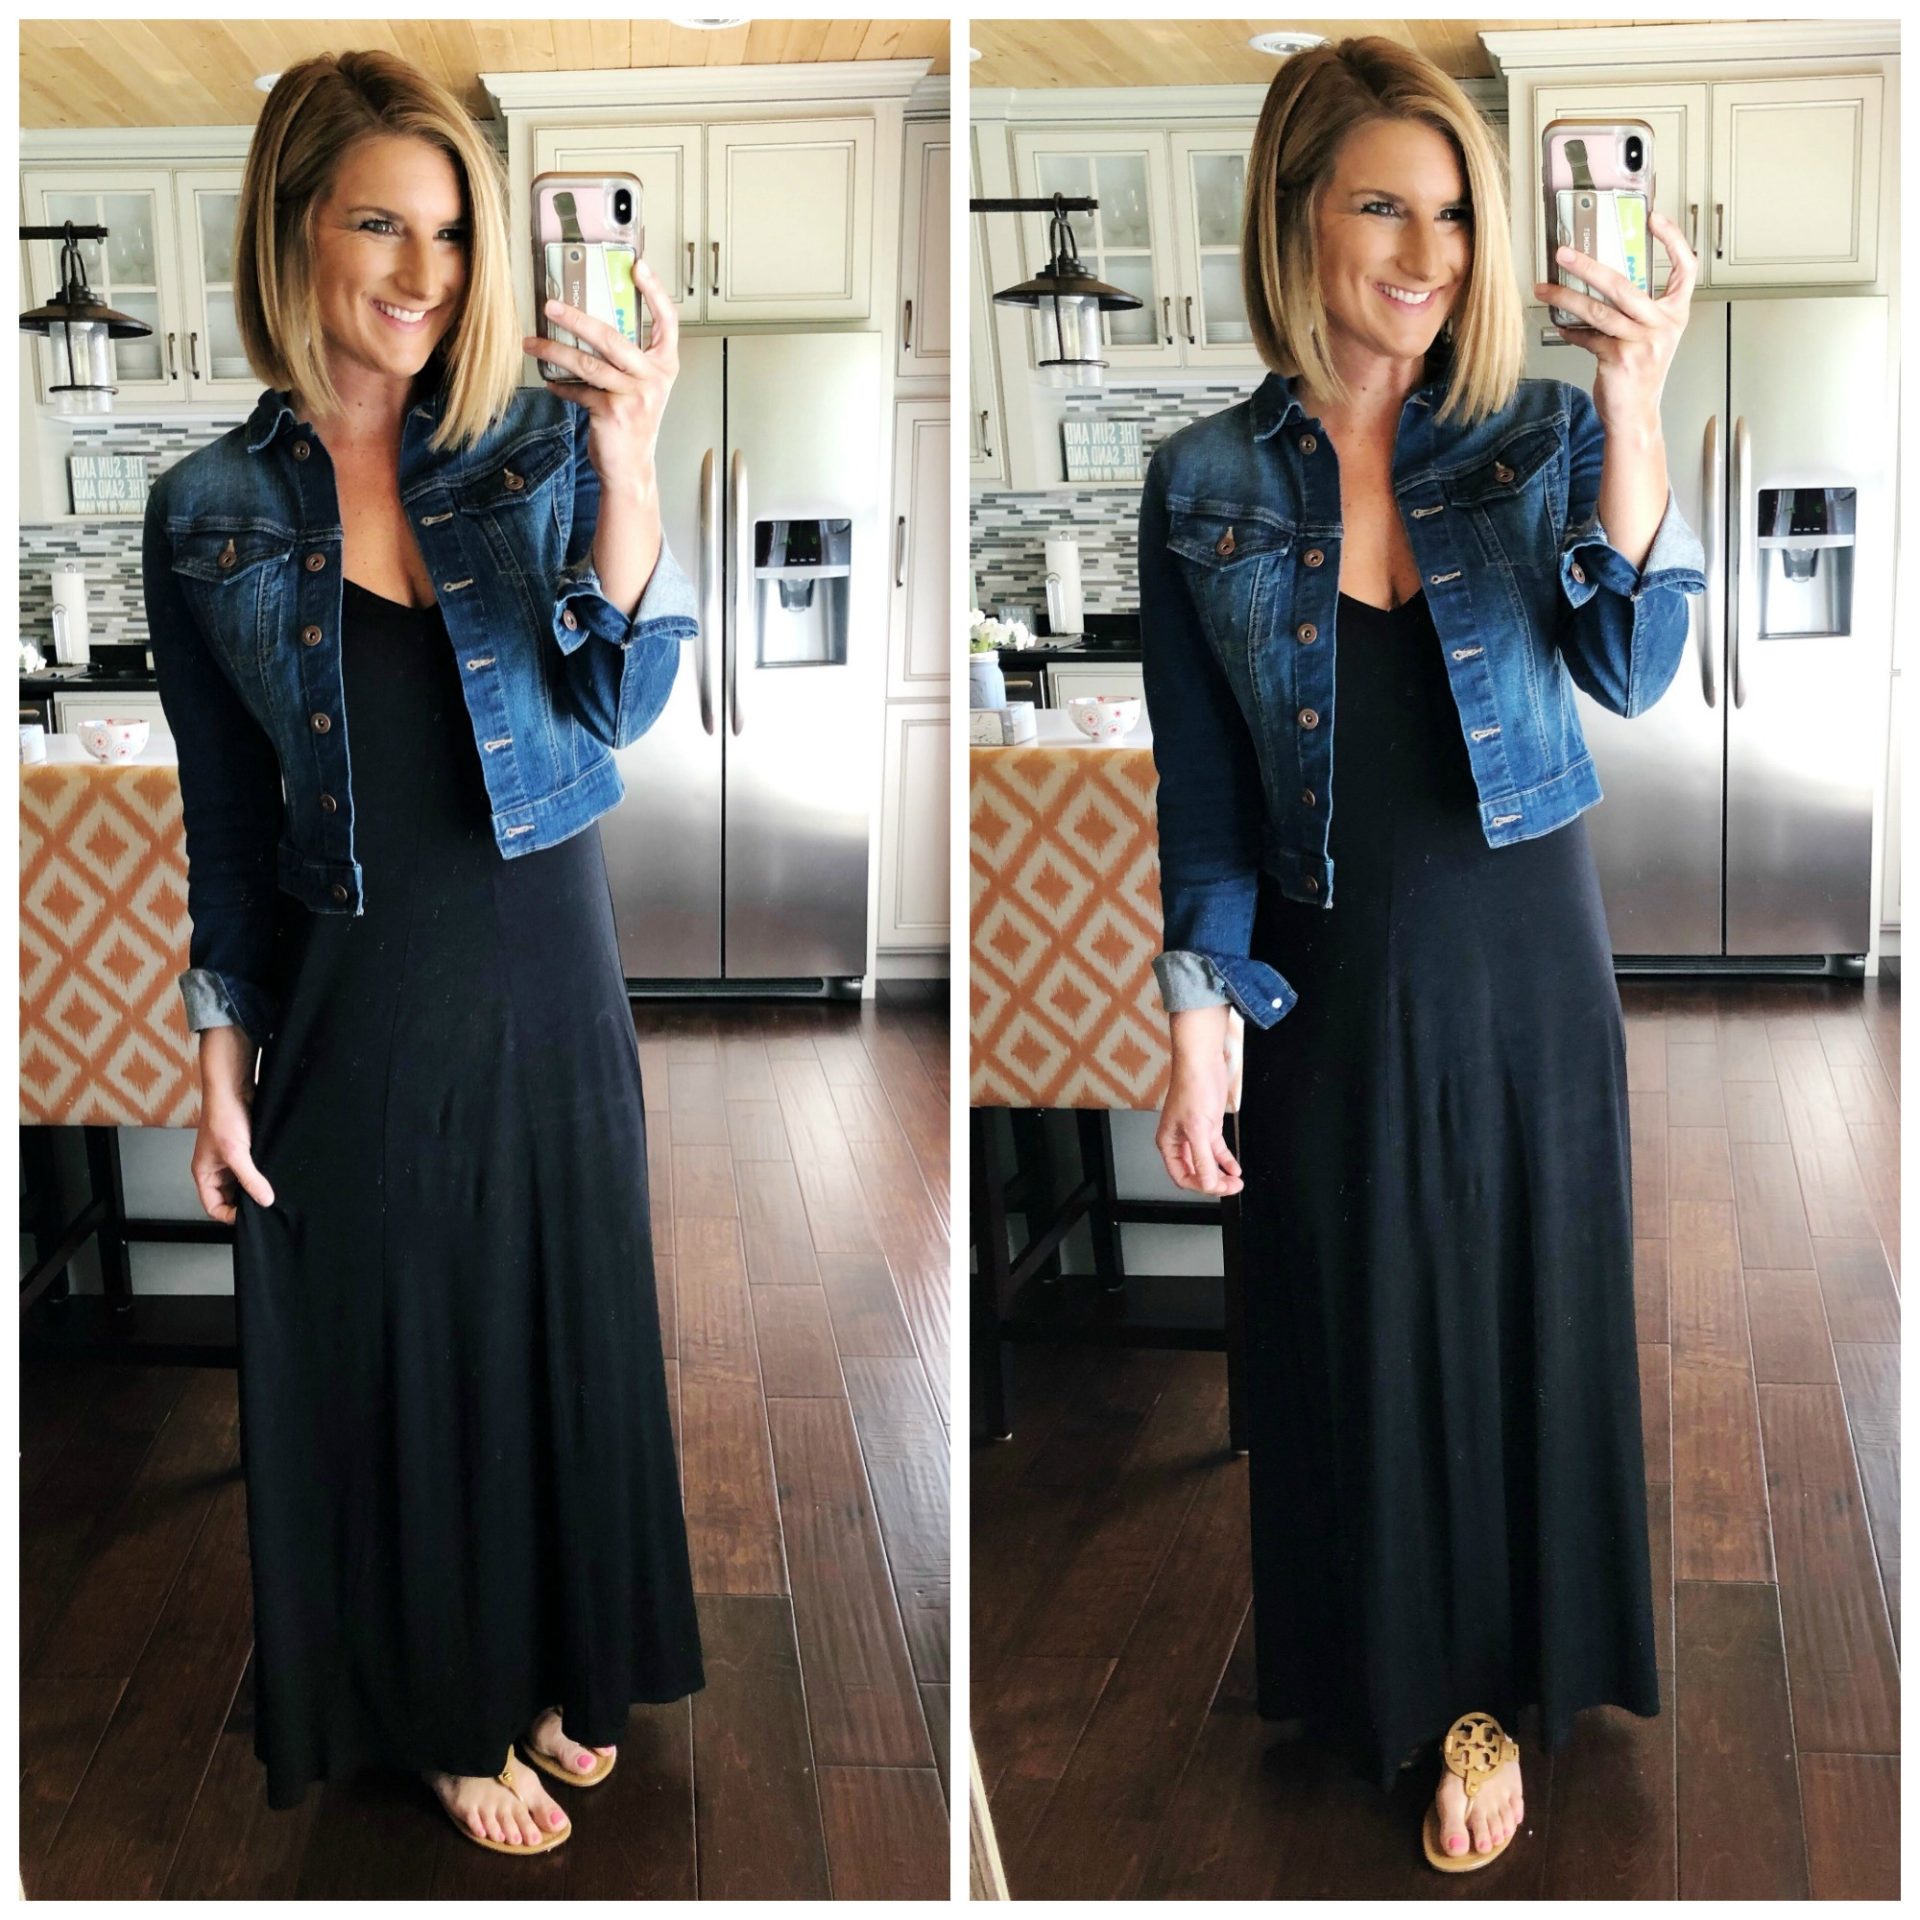 How to style a maxi dress for Spring // What to wear with a denim jacket // Cute black dress for spring and summer